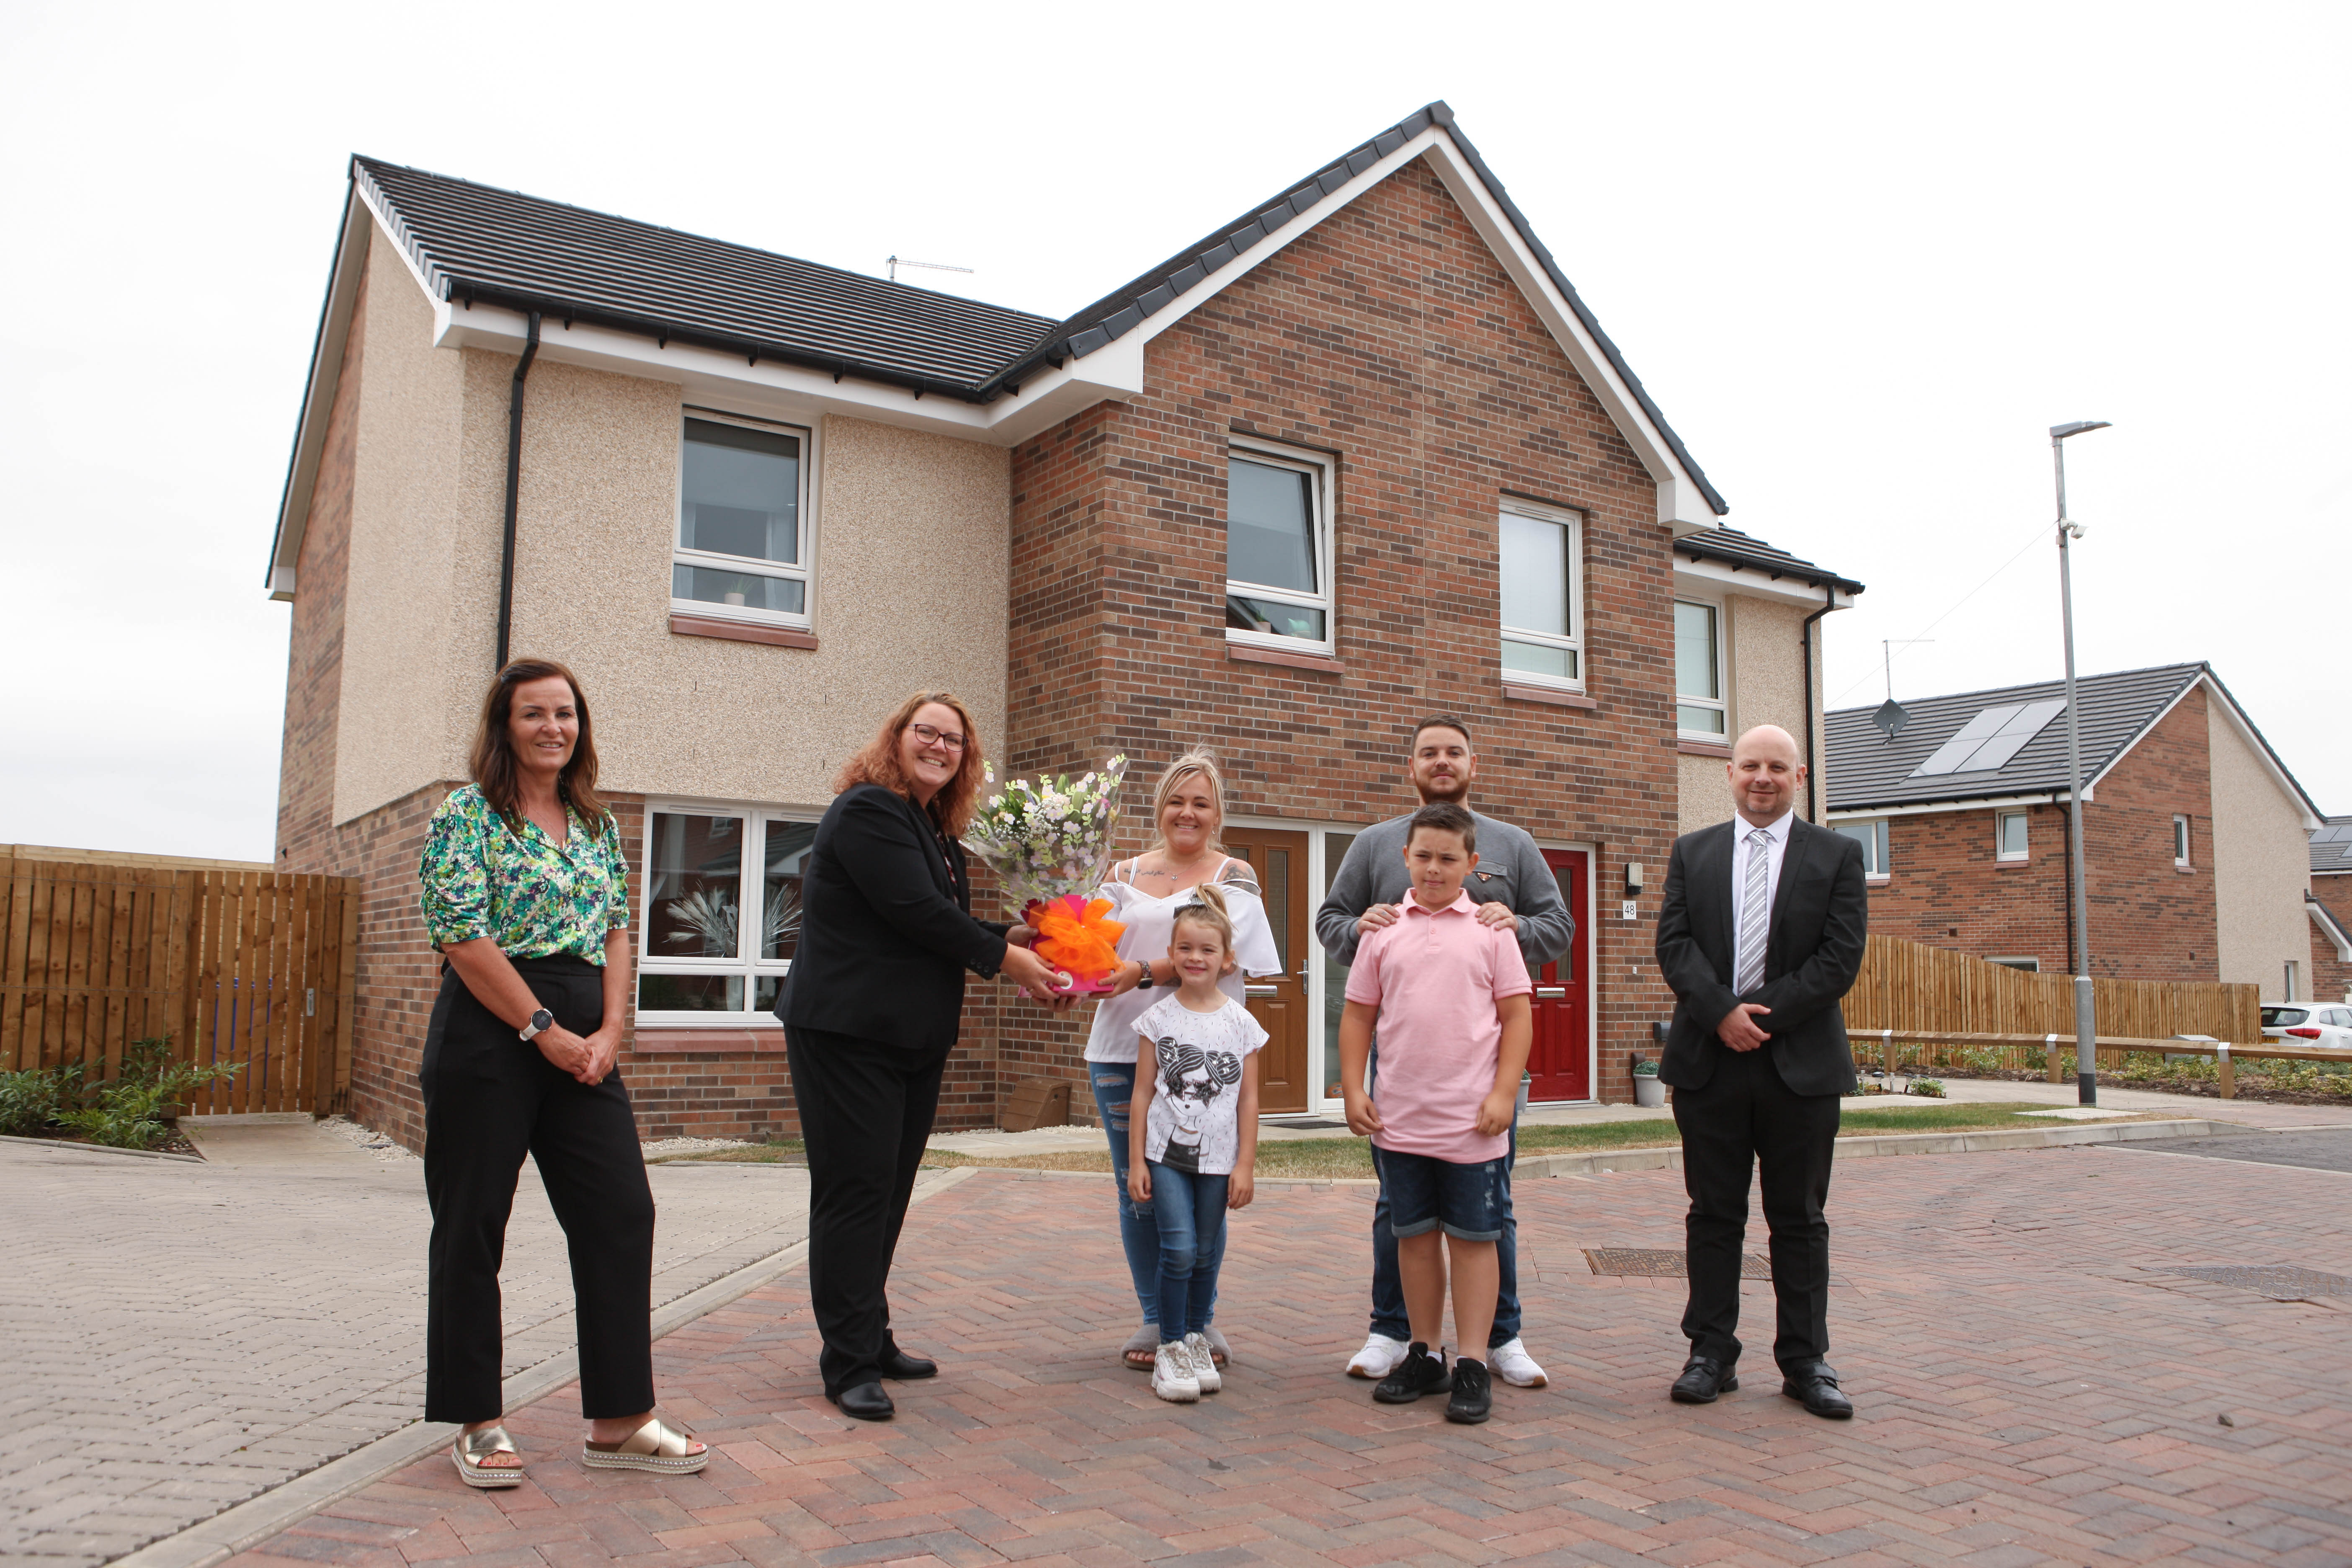 800th tenant moves into new build council home in North Lanarkshire